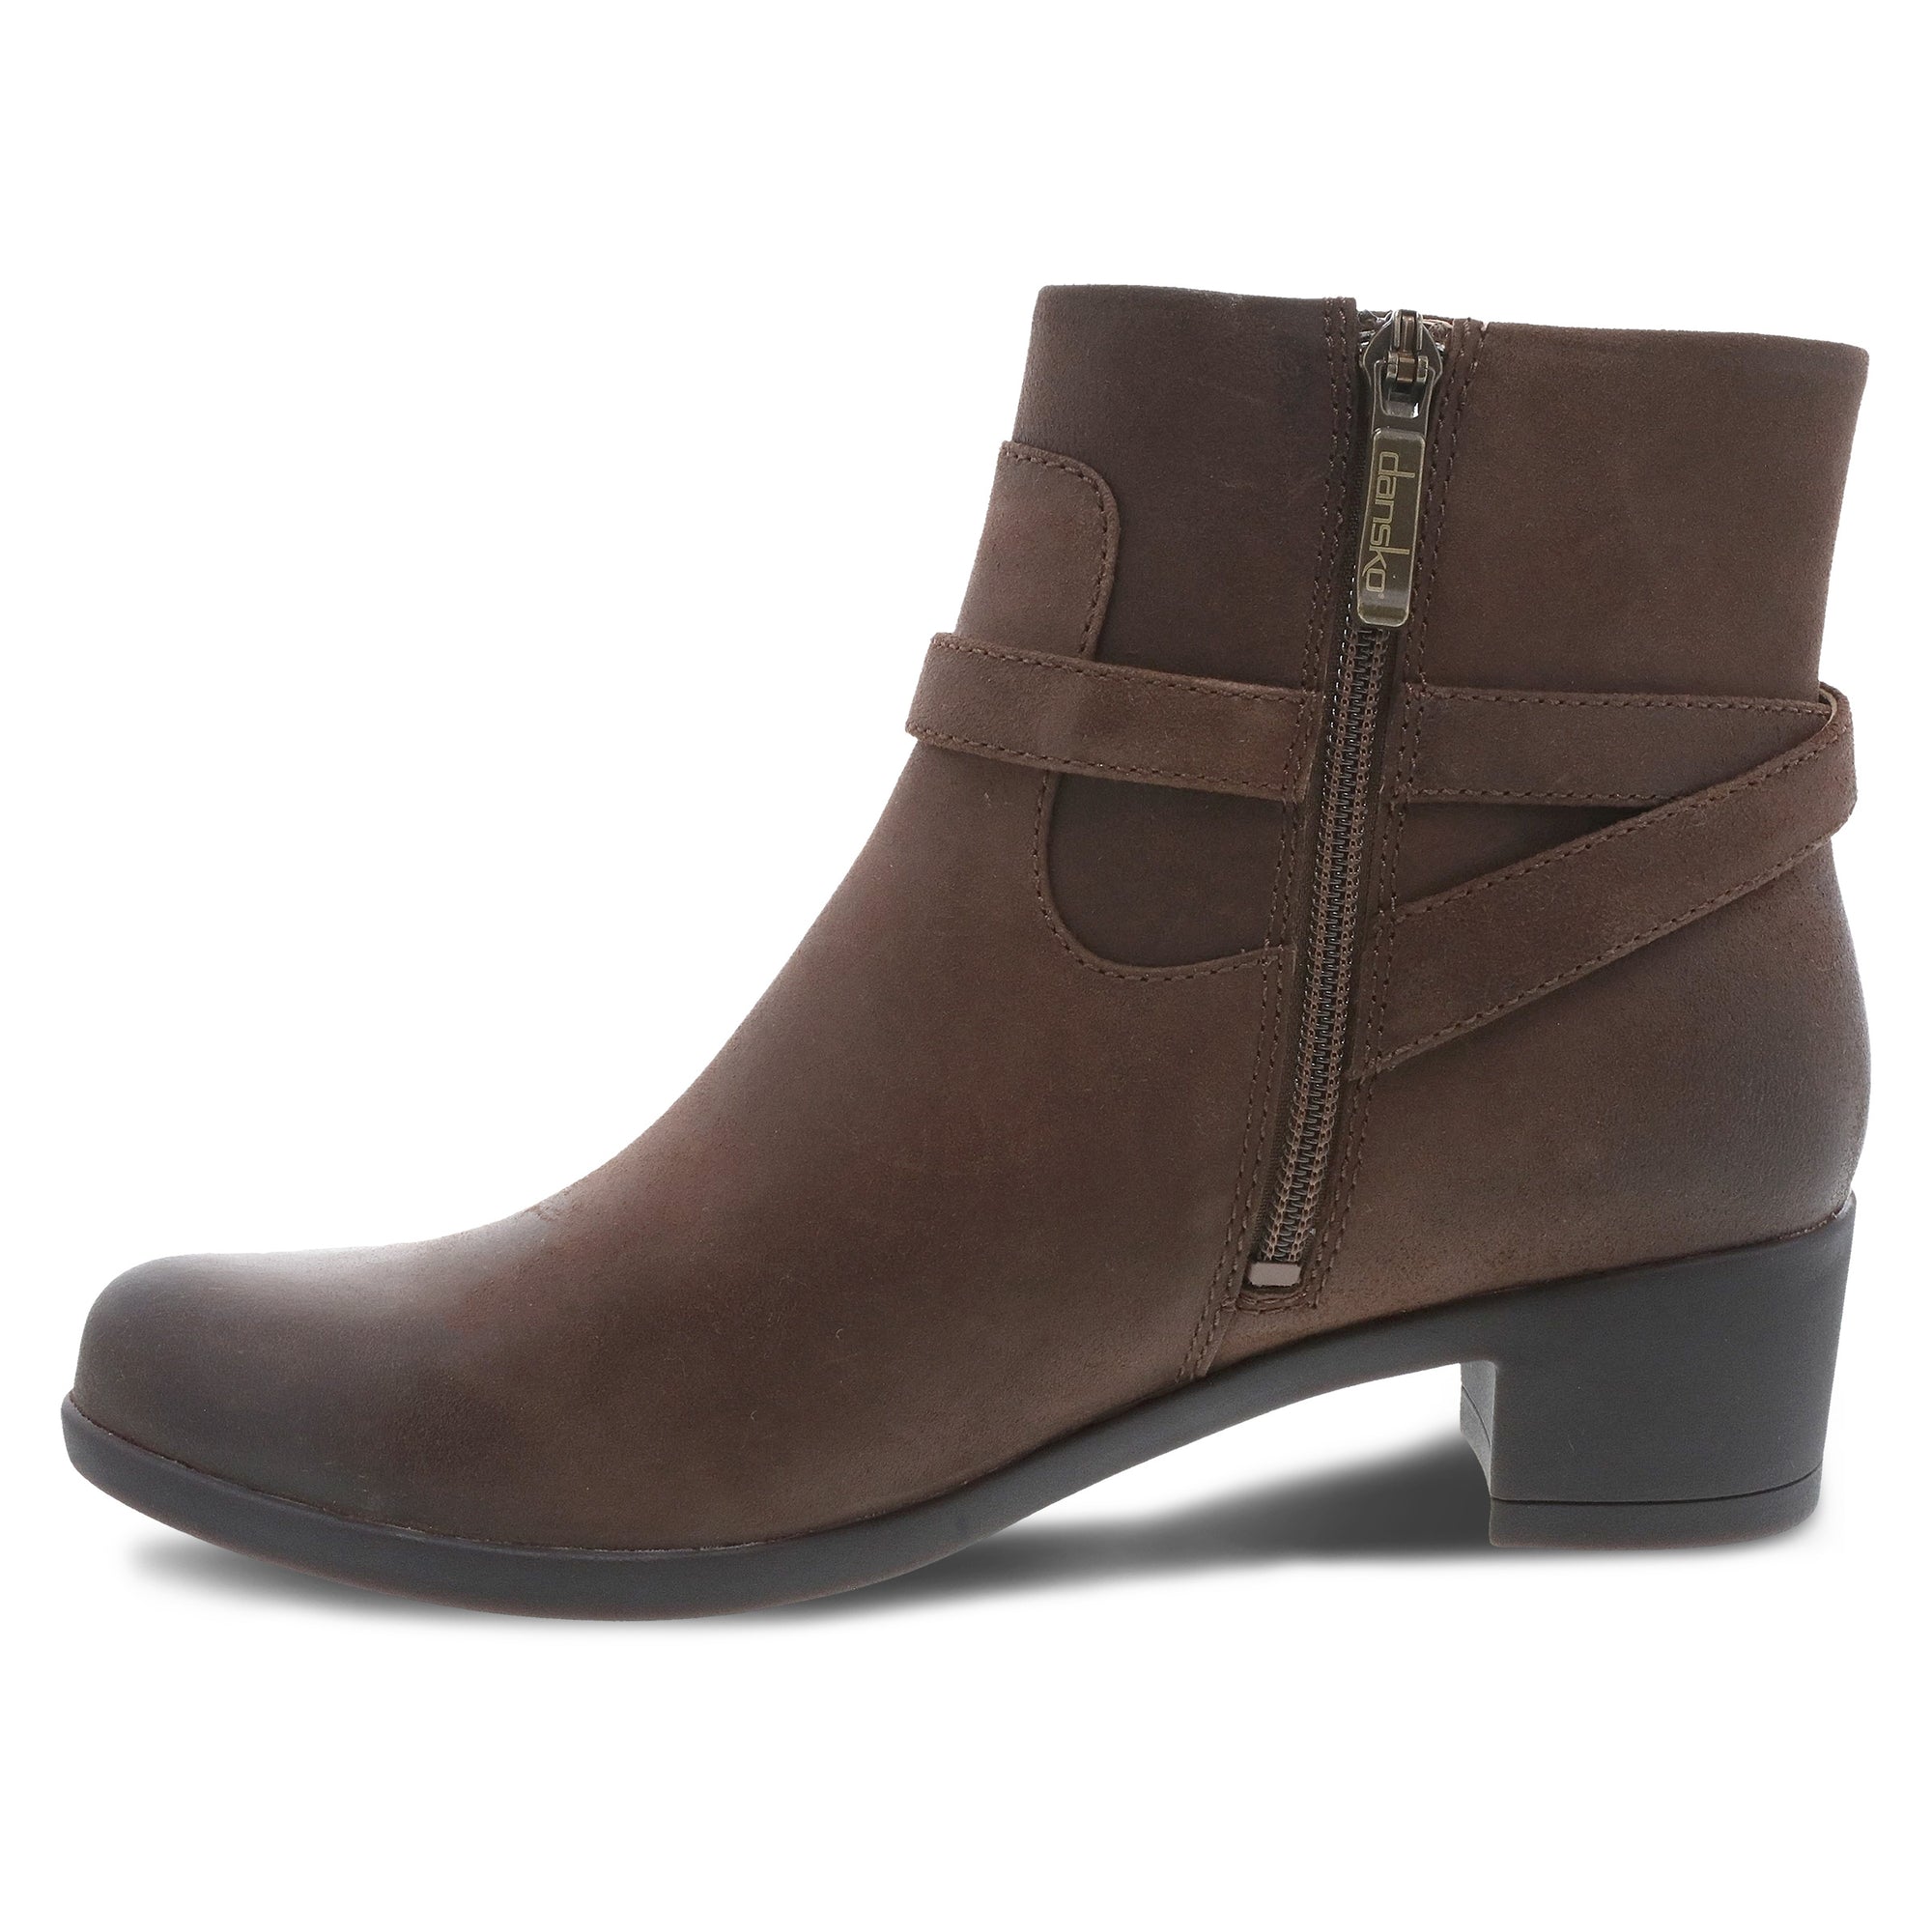 Mid-shaft boot shown from side to highlight zipper for easy wear and high-quality leather.